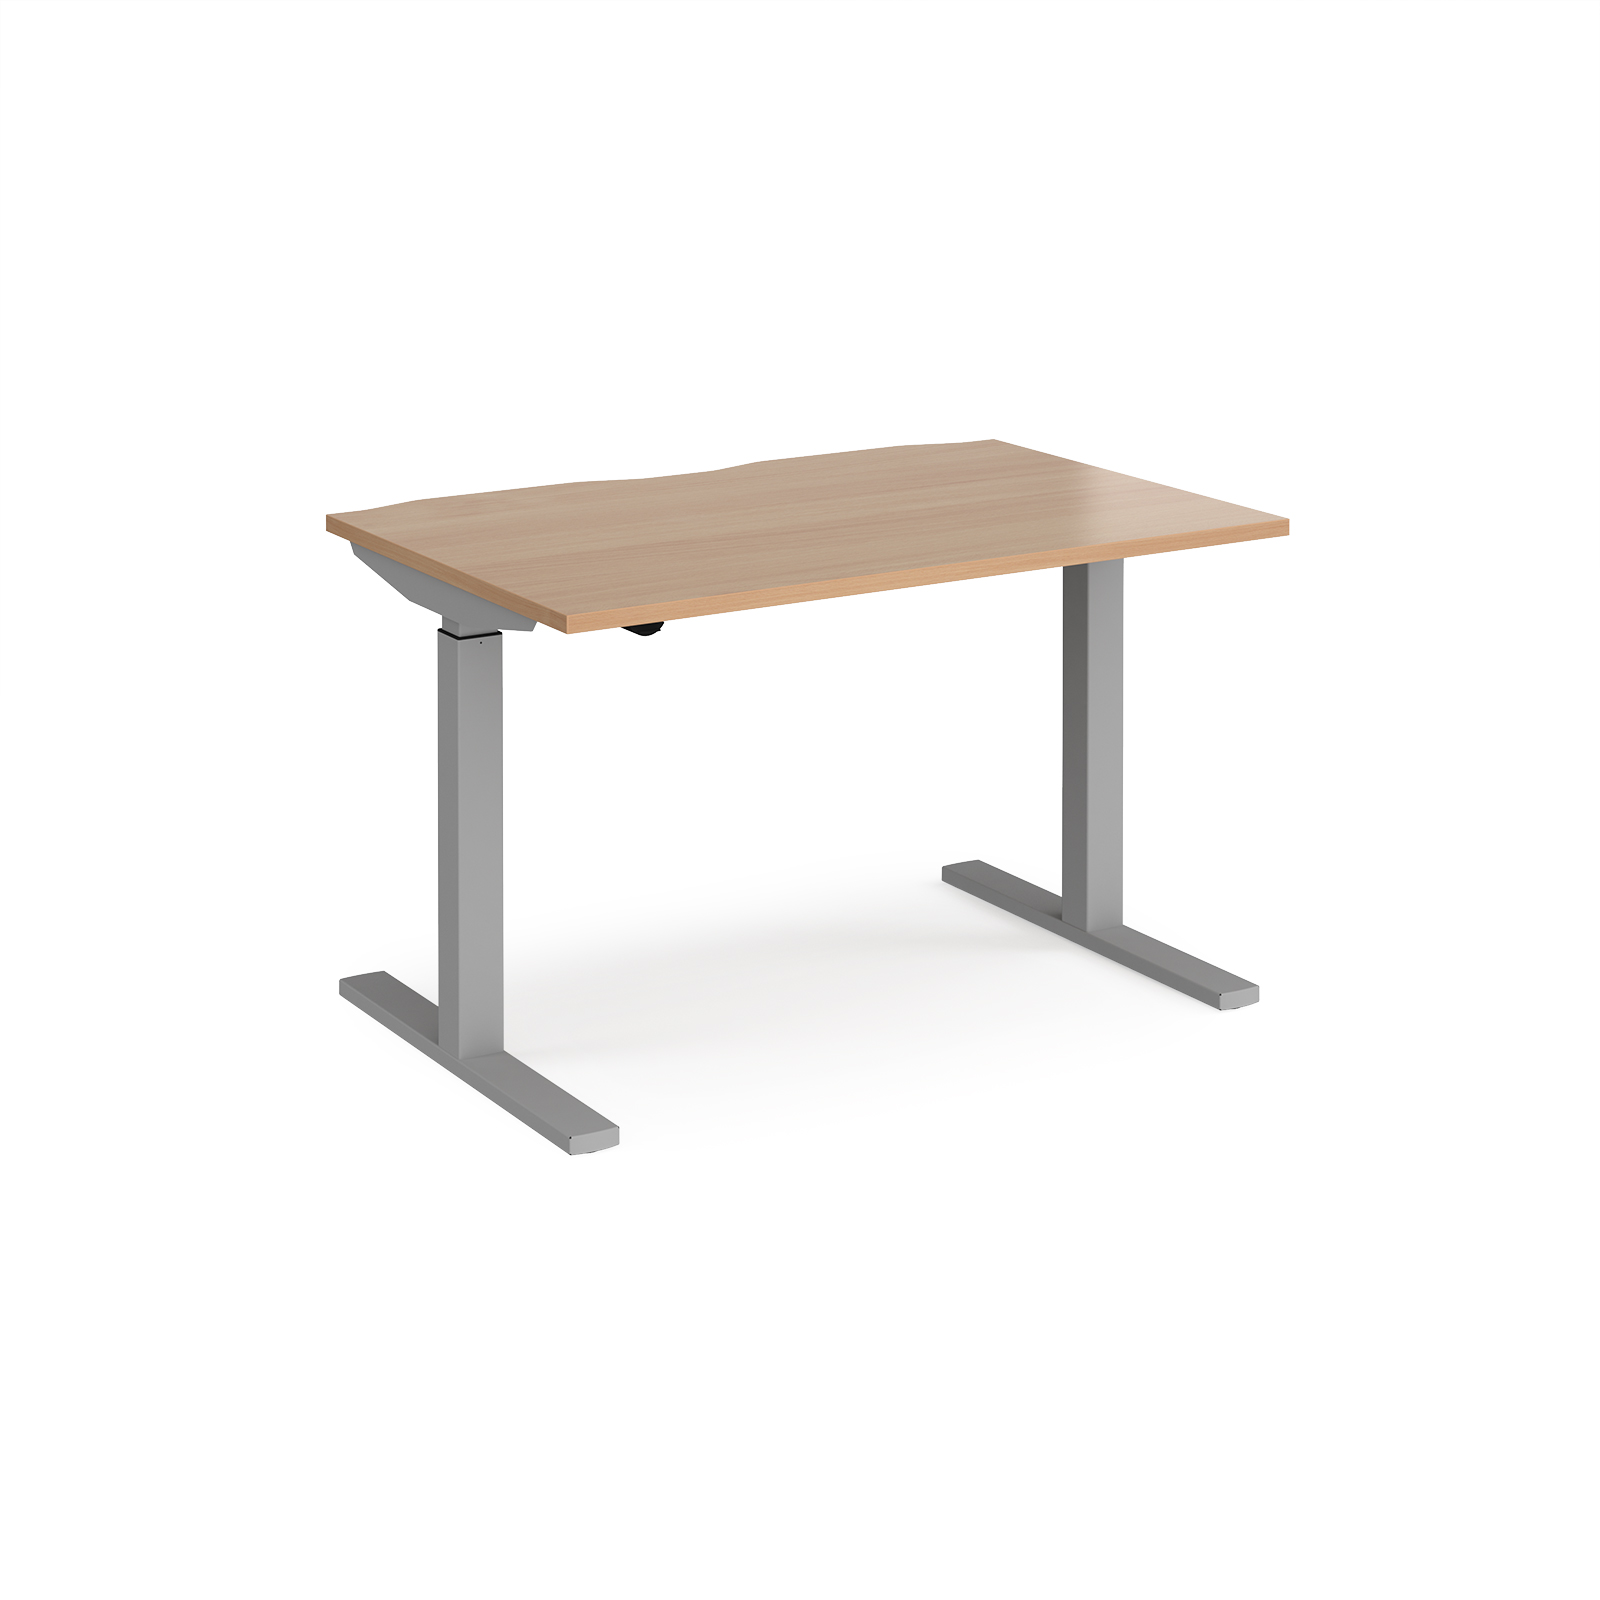 Elev8 Mono straight sit-stand desk 1200mm x 800mm - silver frame, beech top